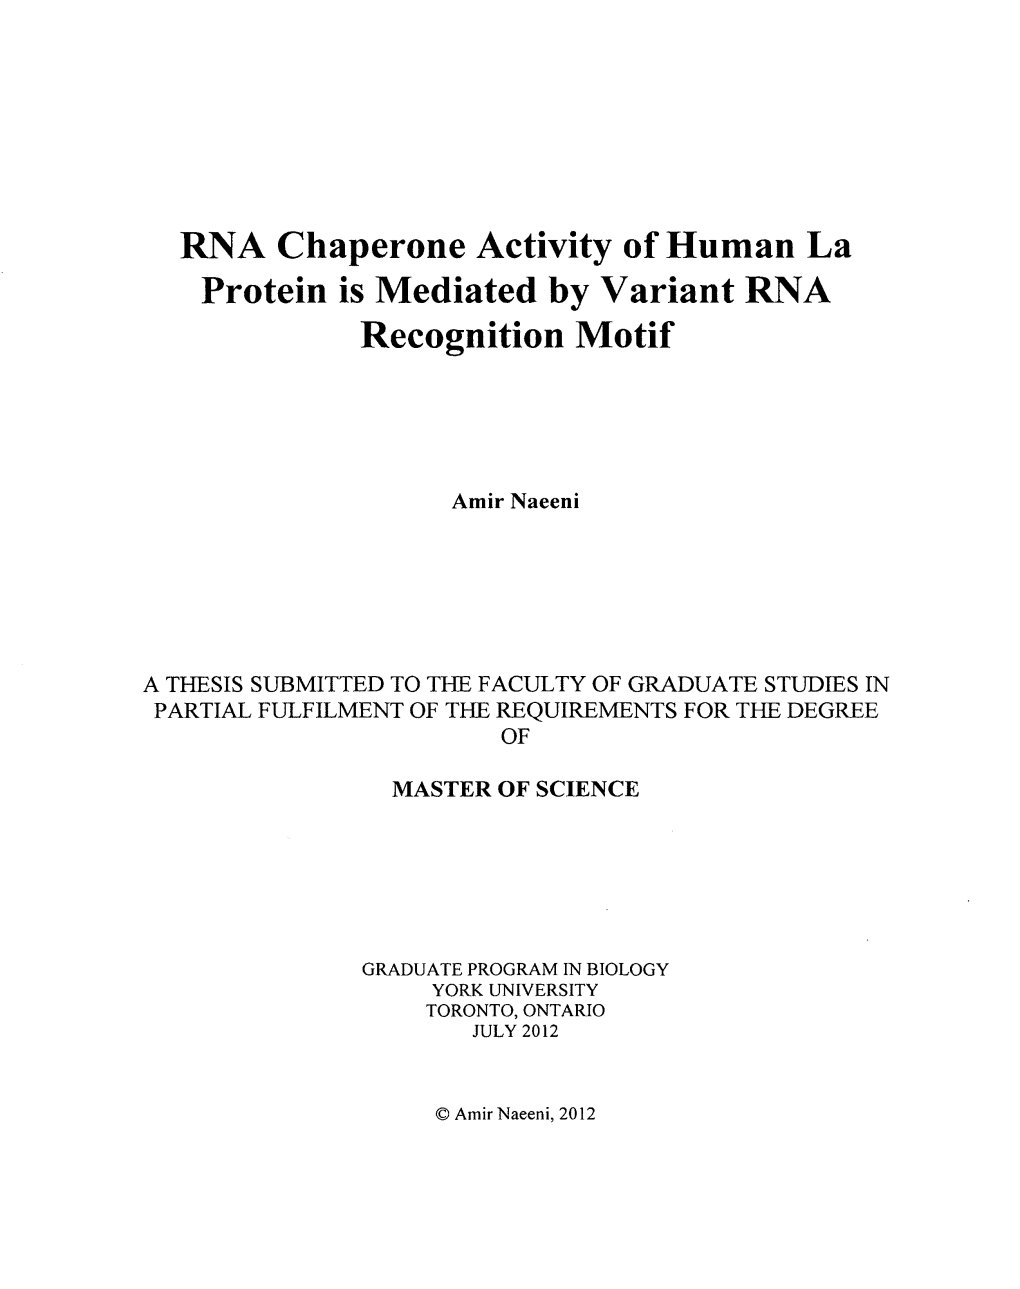 RNA Chaperone Activity of Human La Protein Is Mediated by Variant RNA Recognition Motif